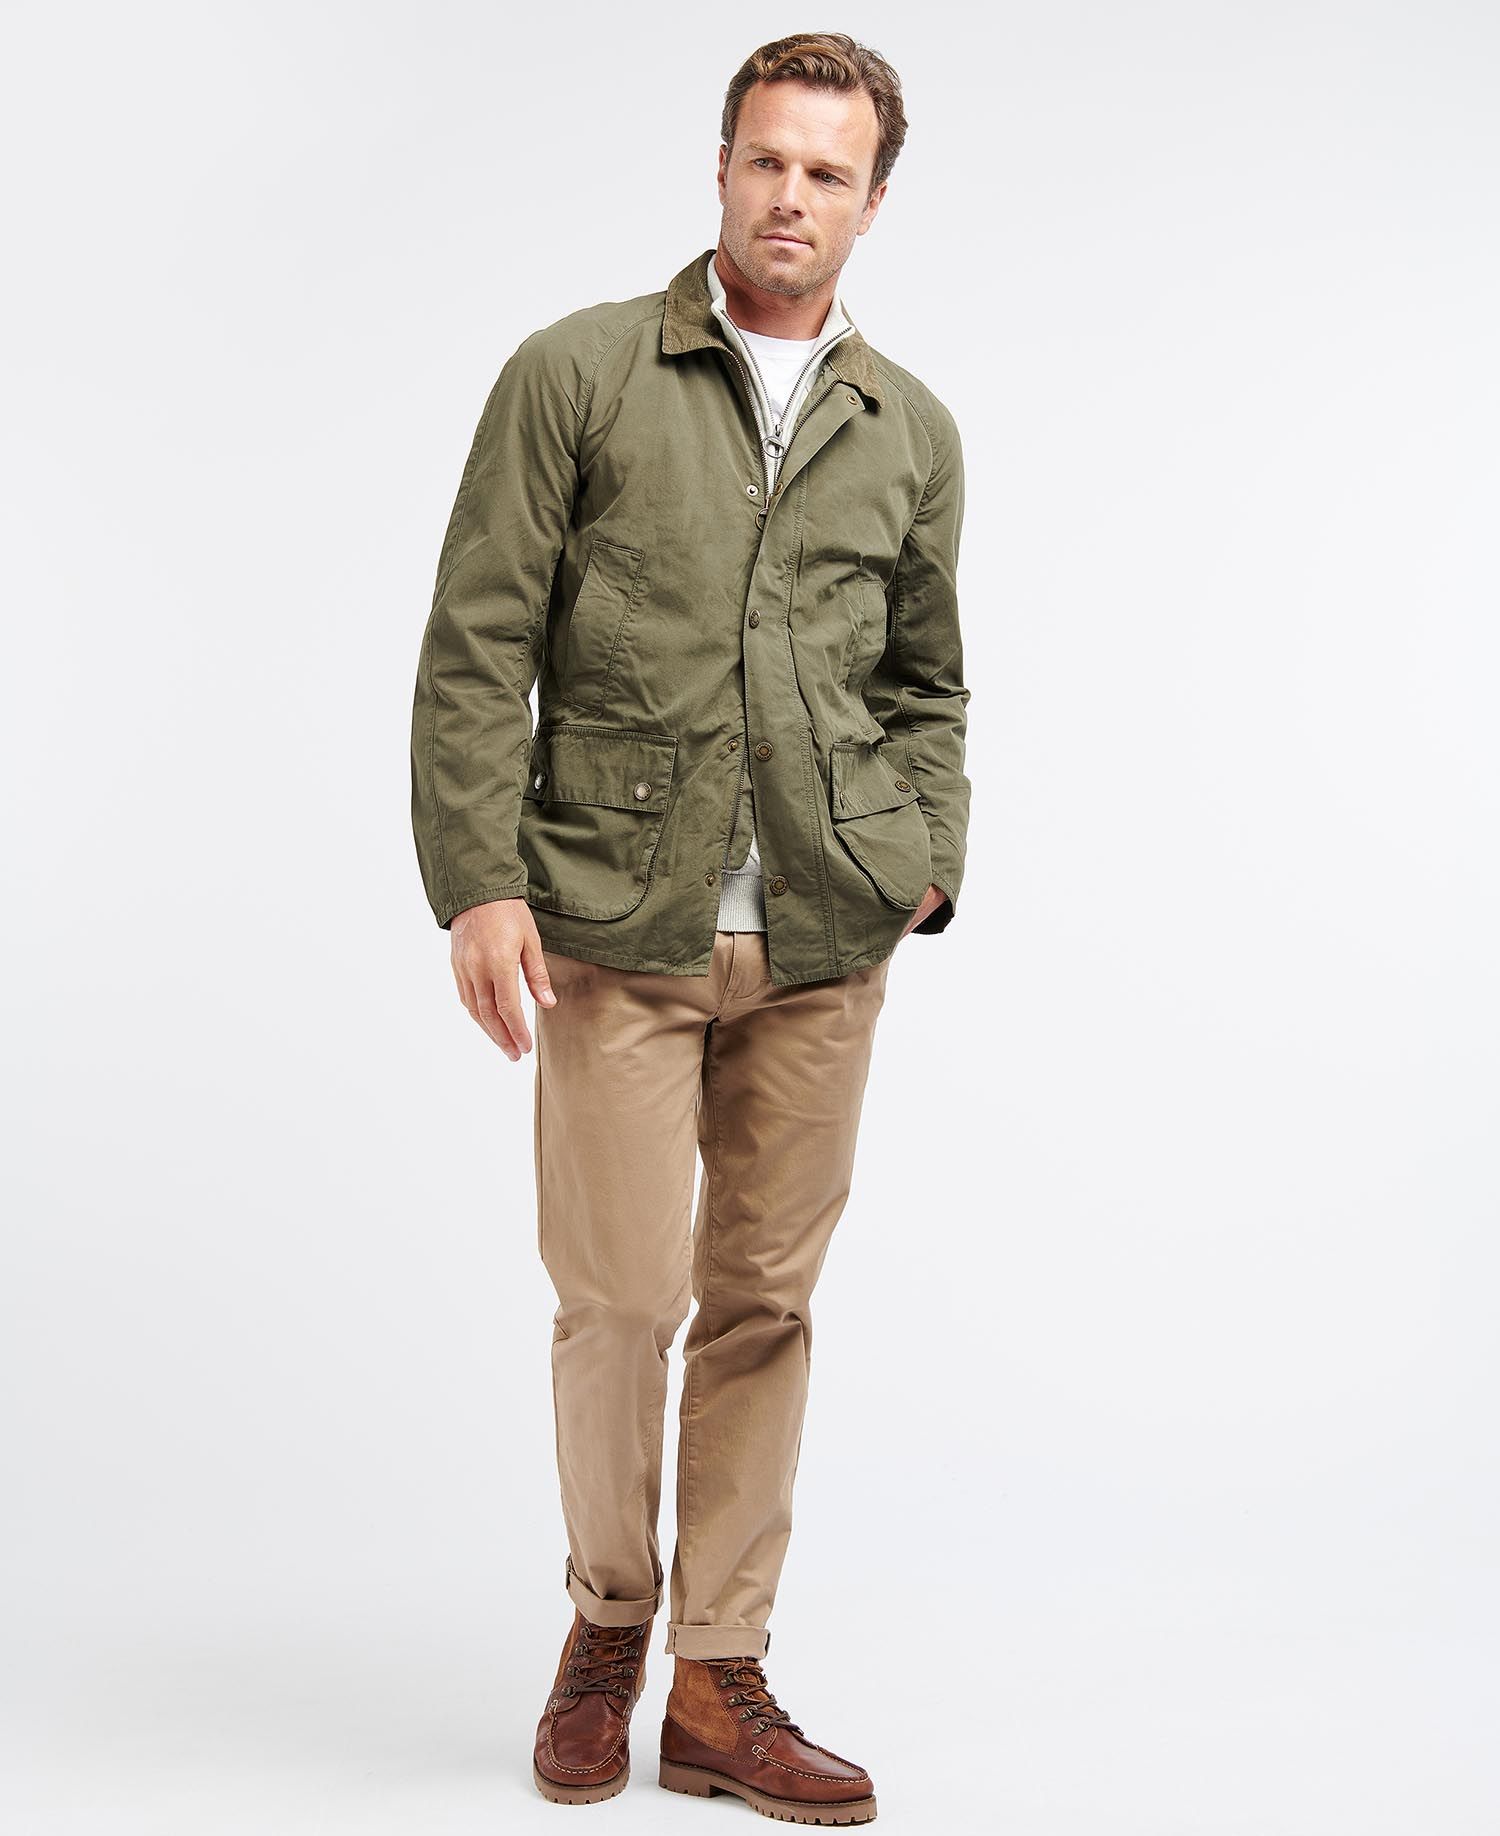 Shop the Barbour Ashby Casual Jacket in Olive | Barbour